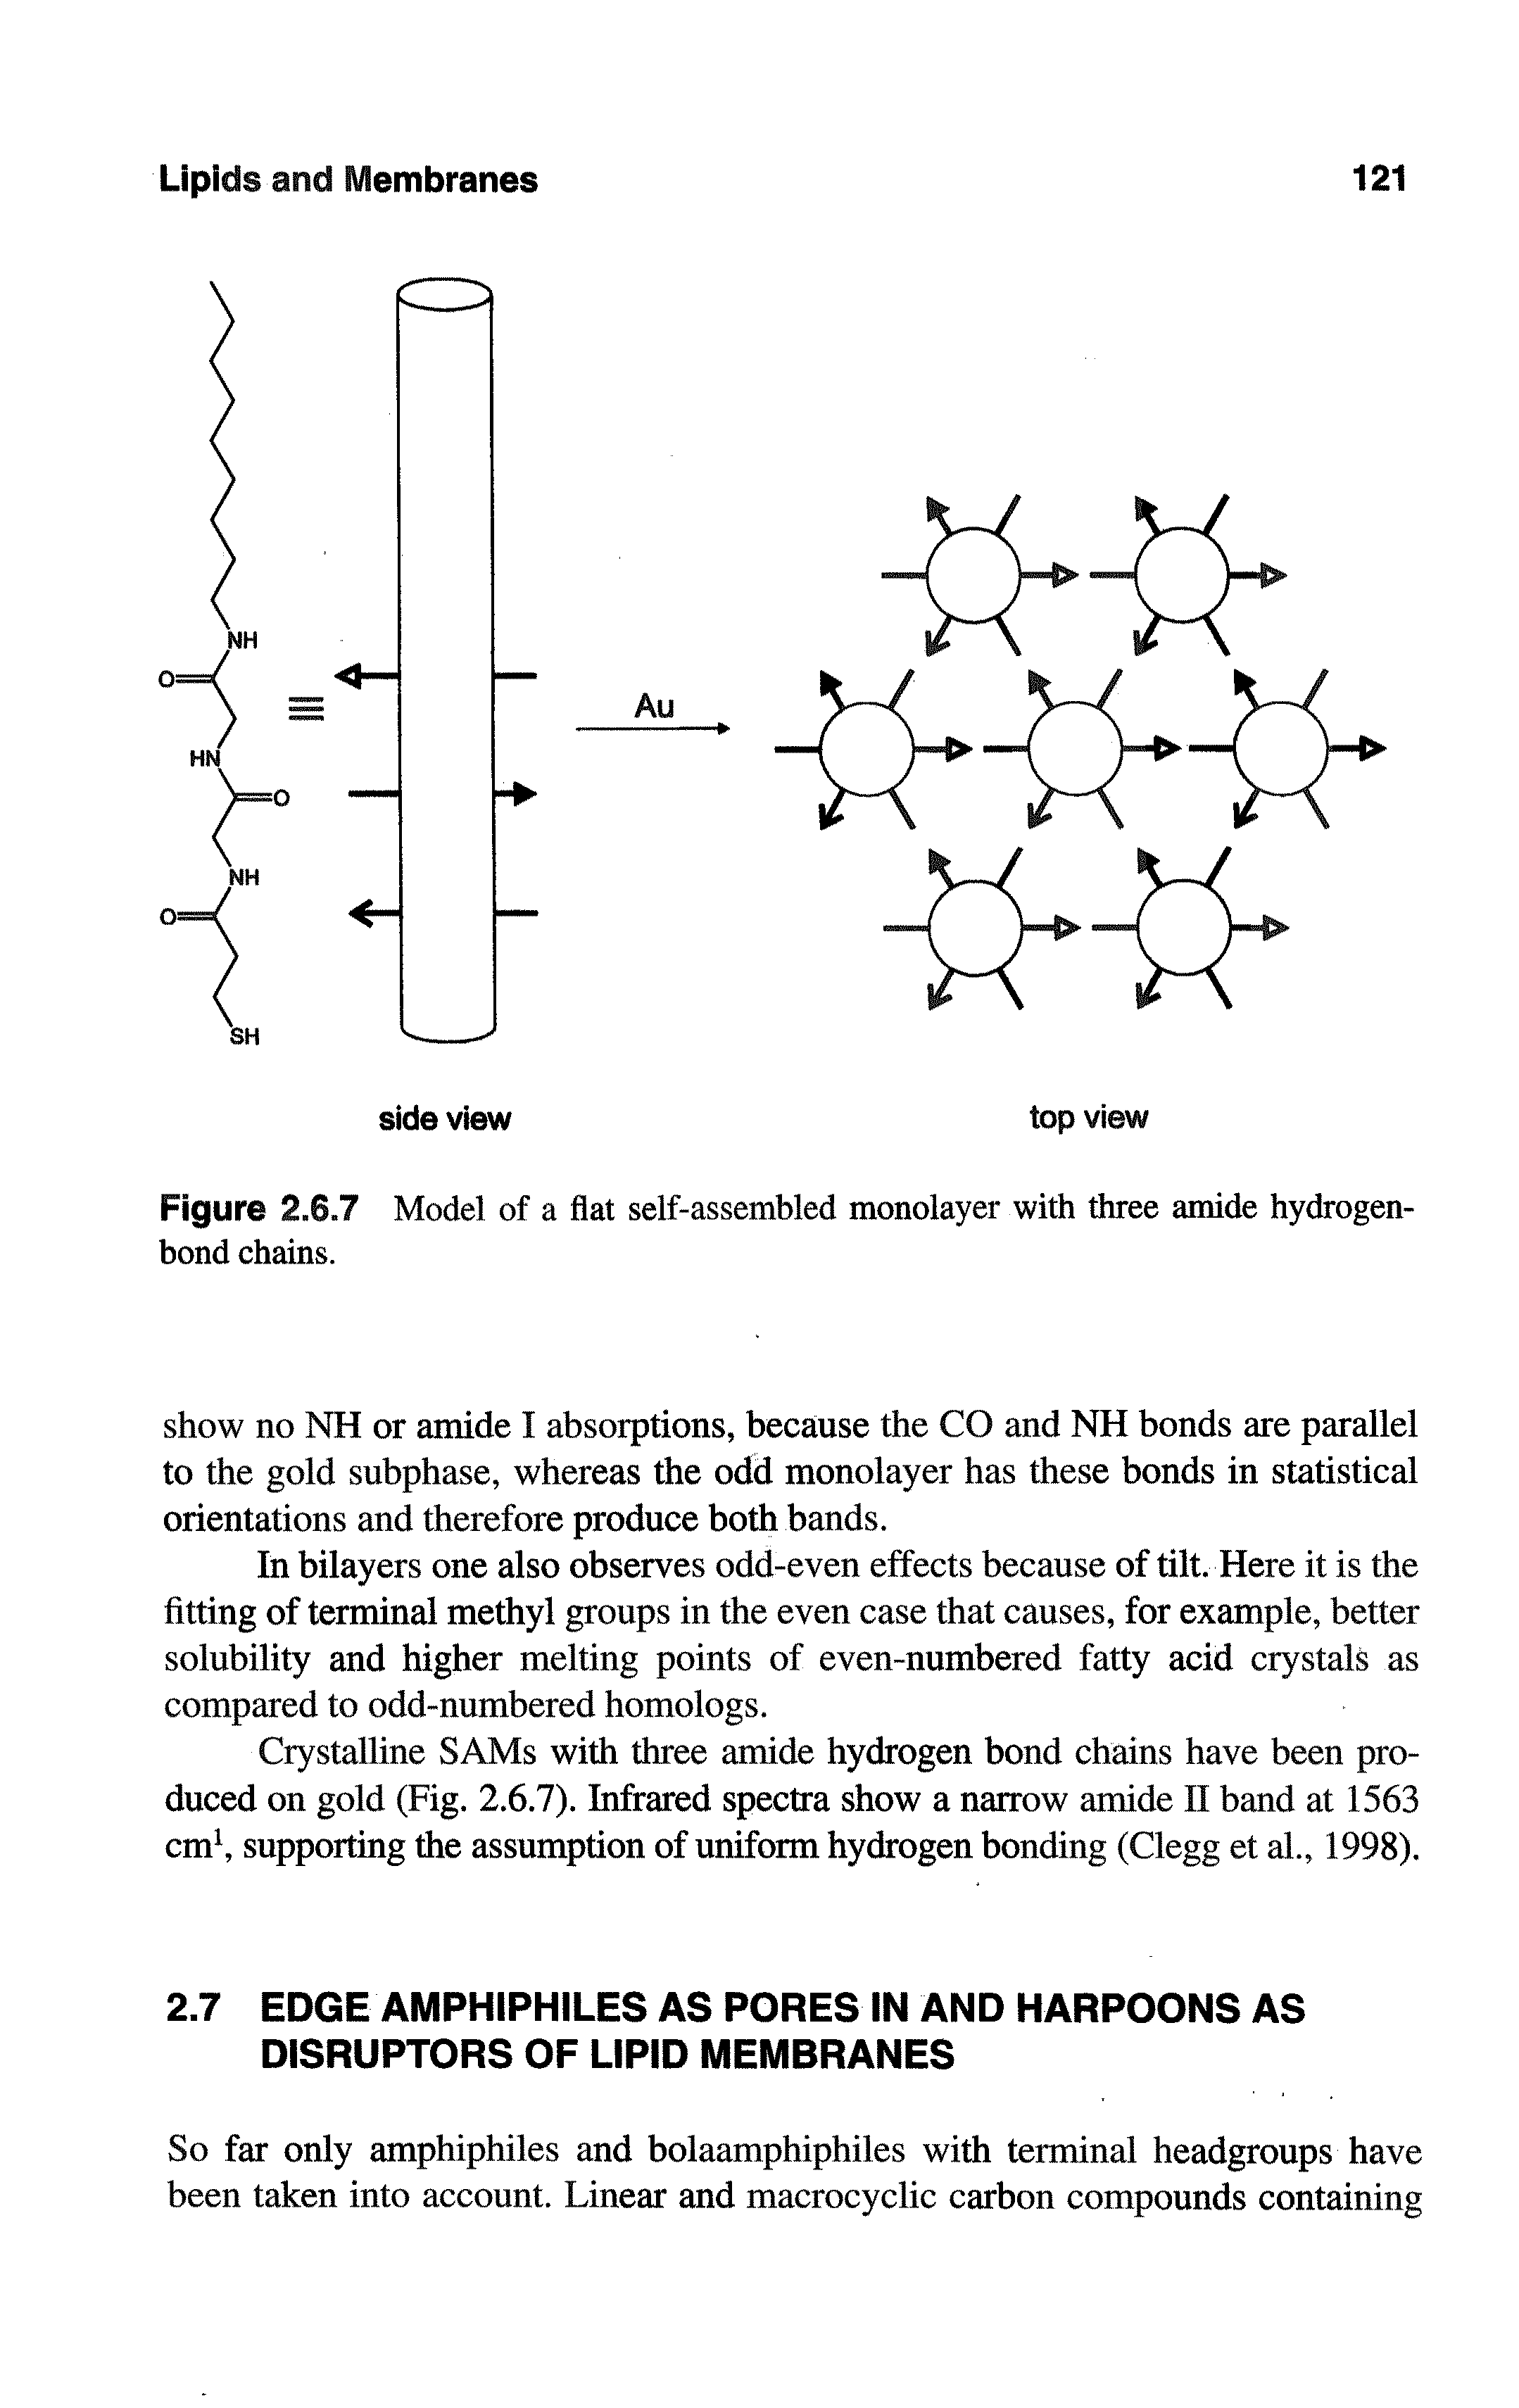 Figure 2.6.7 Model of a flat self-assembled monolayer with three amide hydrogen-bond chains.